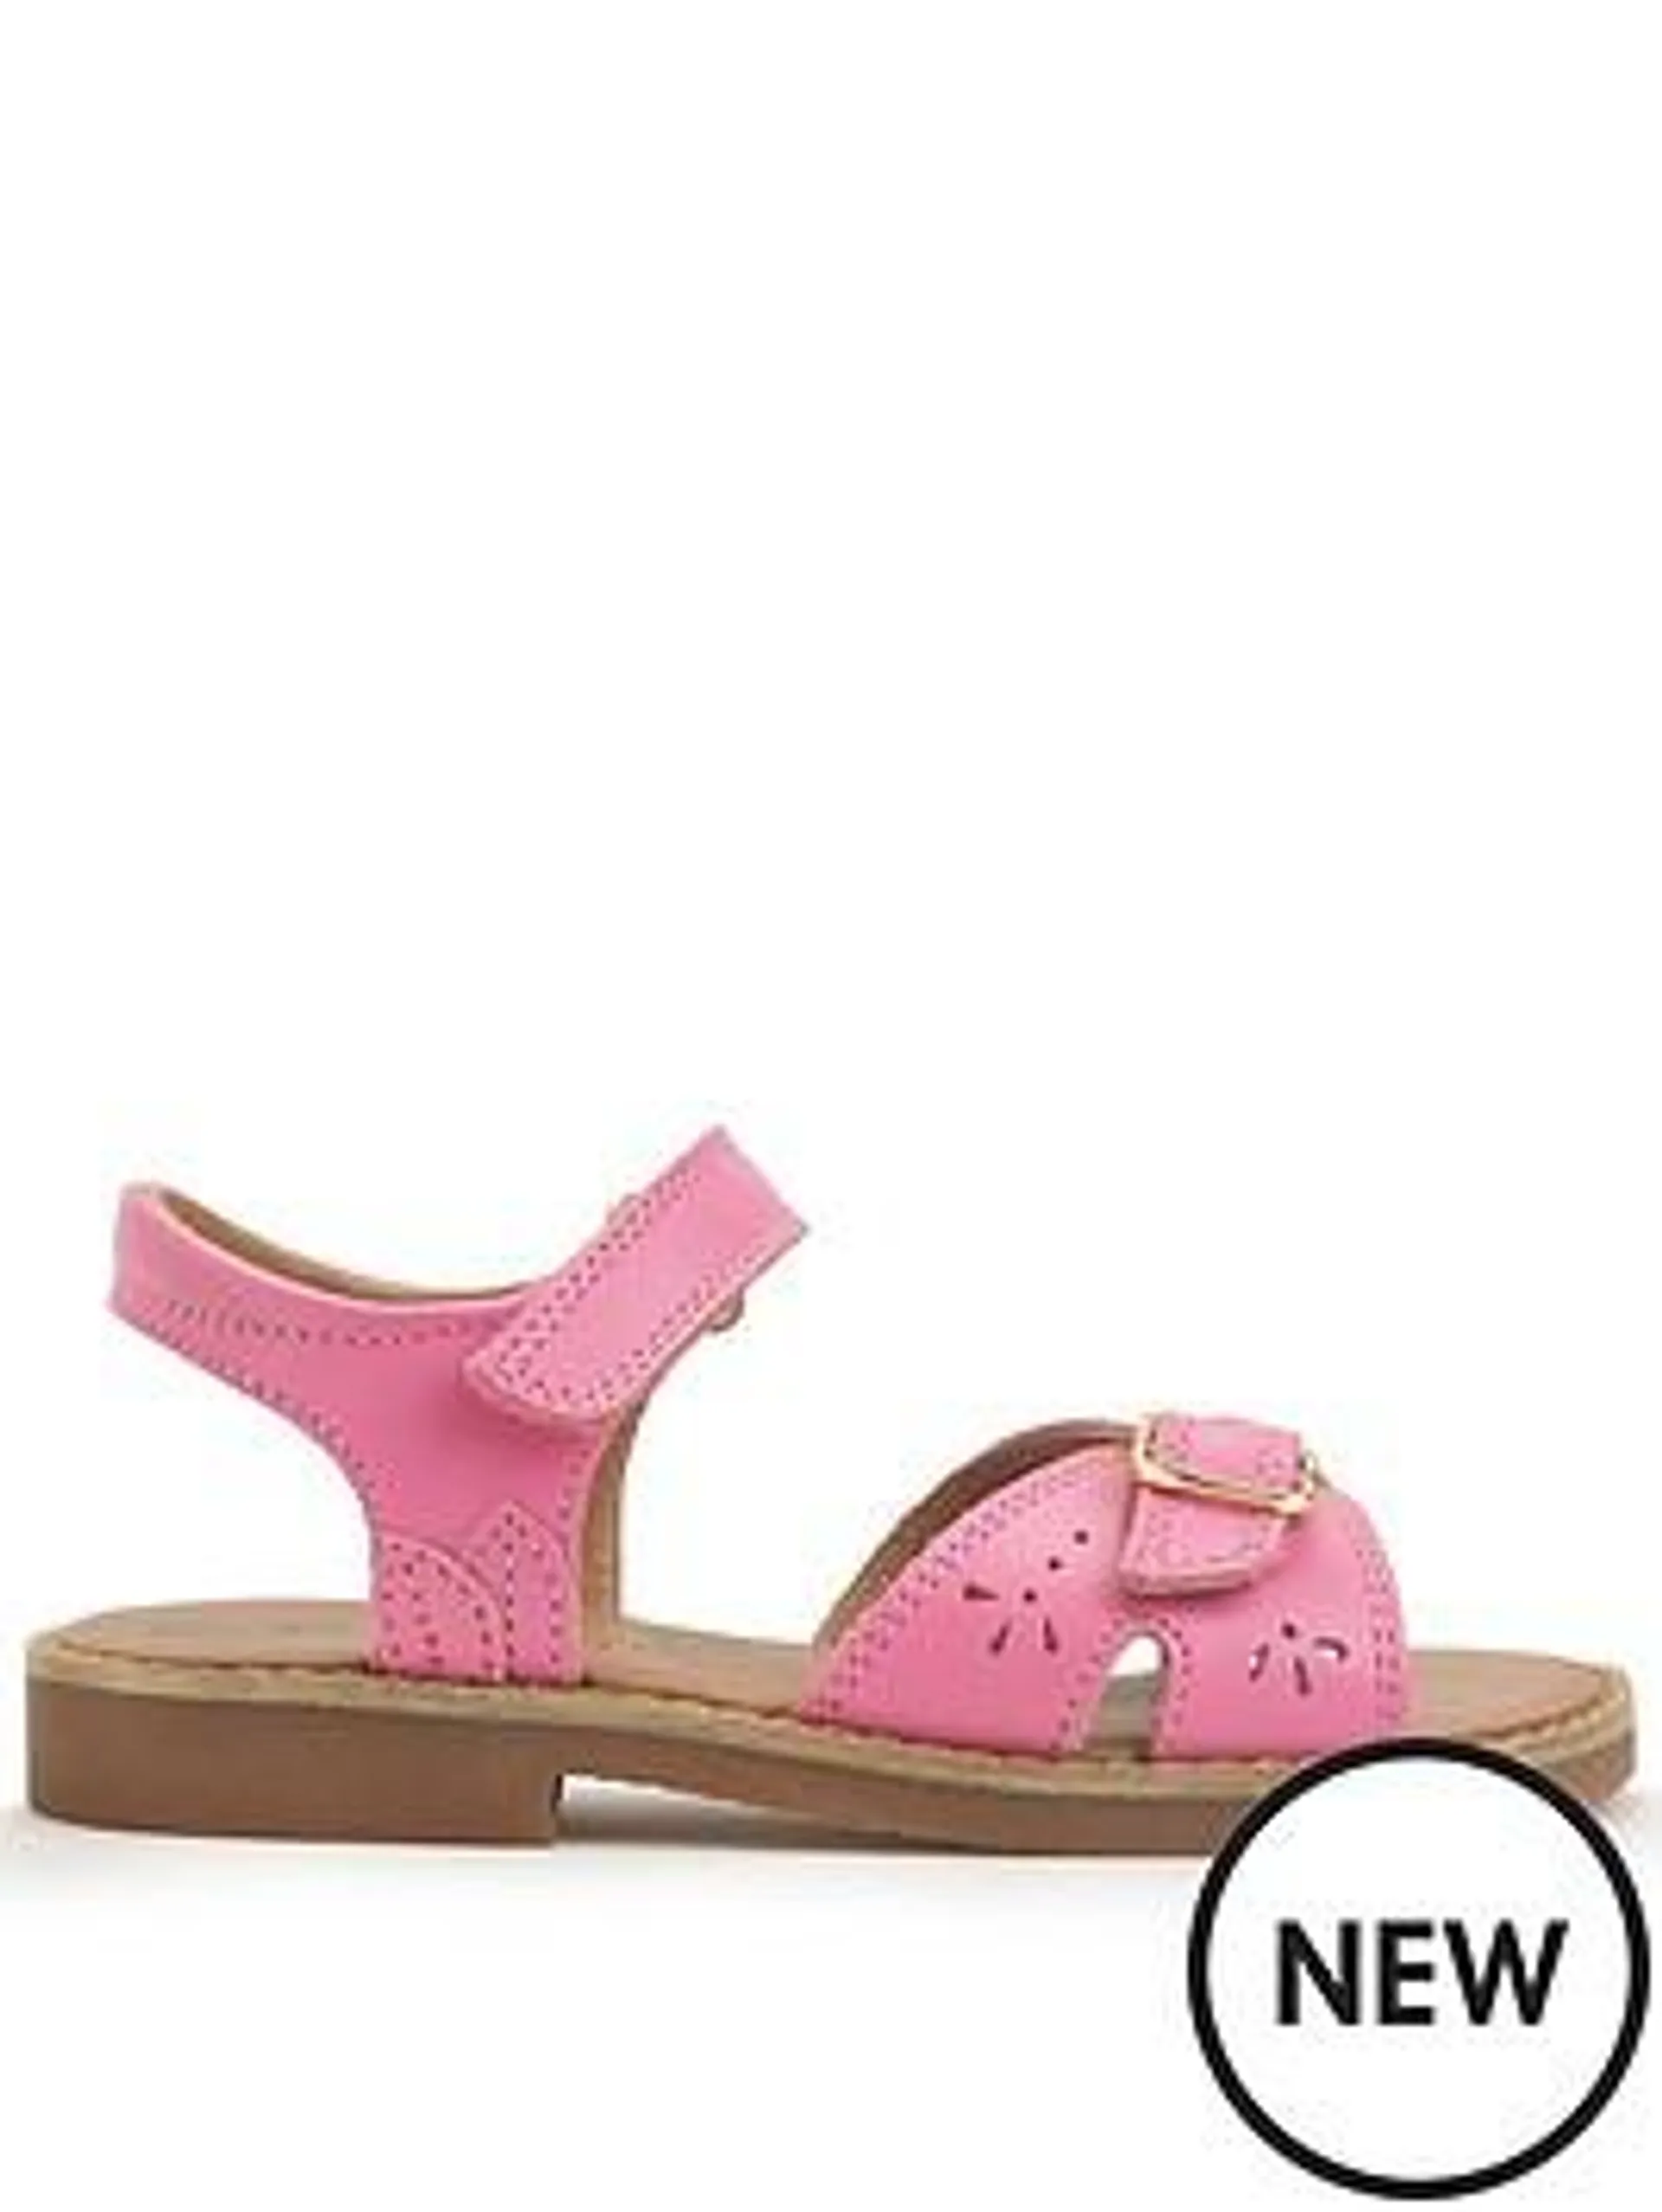 Start-Rite Holiday Girls Leather Summer Sandals With Adjustable Straps - Pink